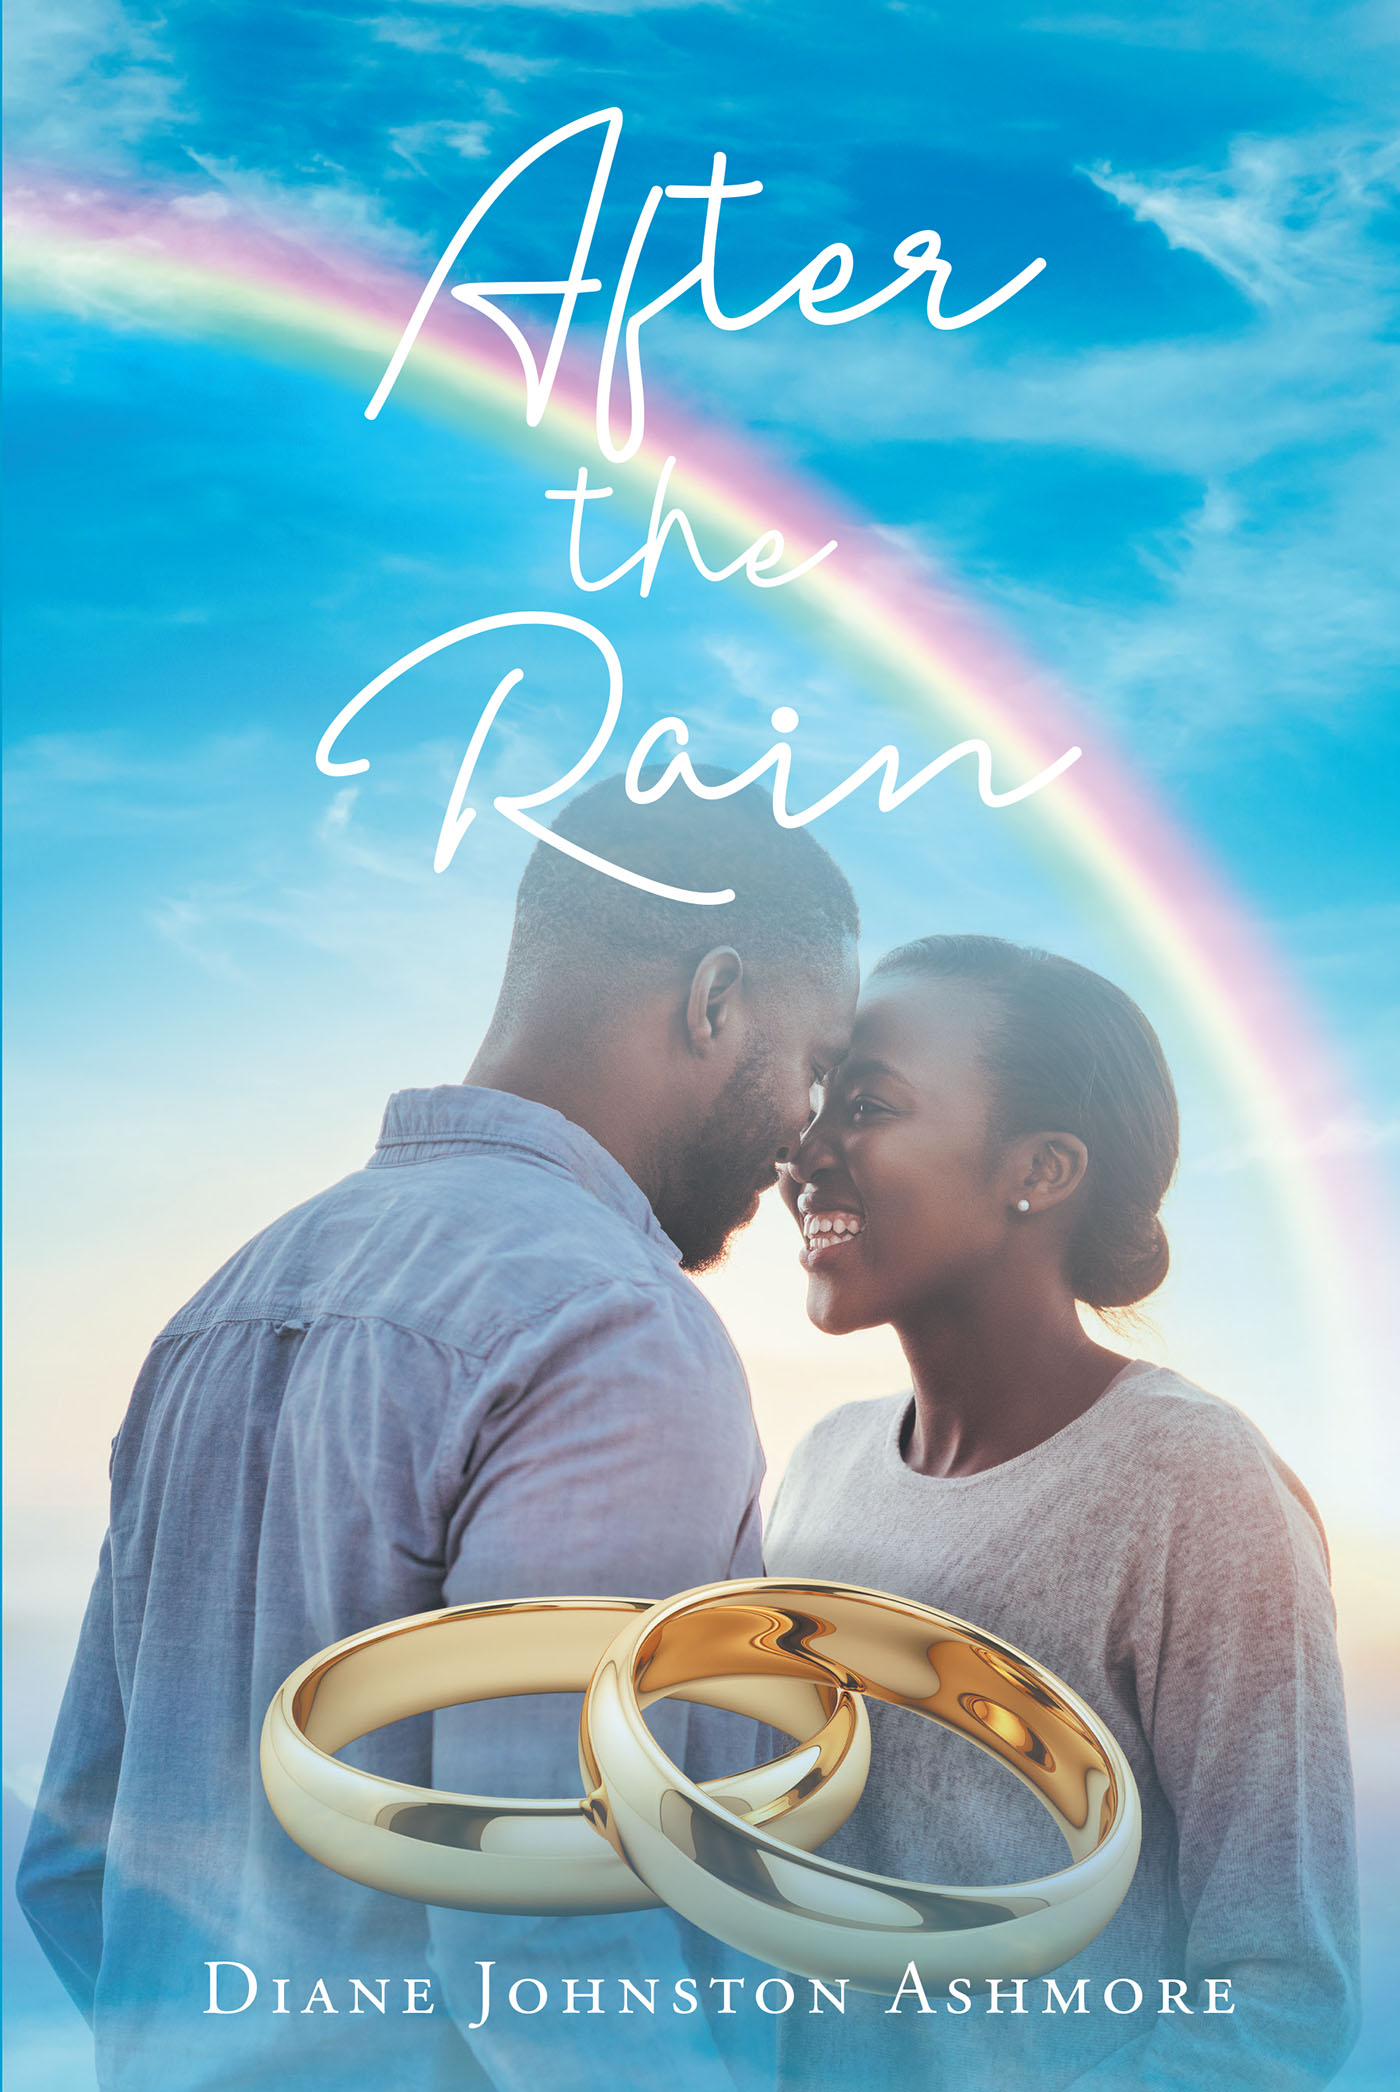 Diane Johnston Ashmore’s Newly Released "After the Rain" is a Compelling Continuation of a Dramatic Tale of Fidelity and Faith